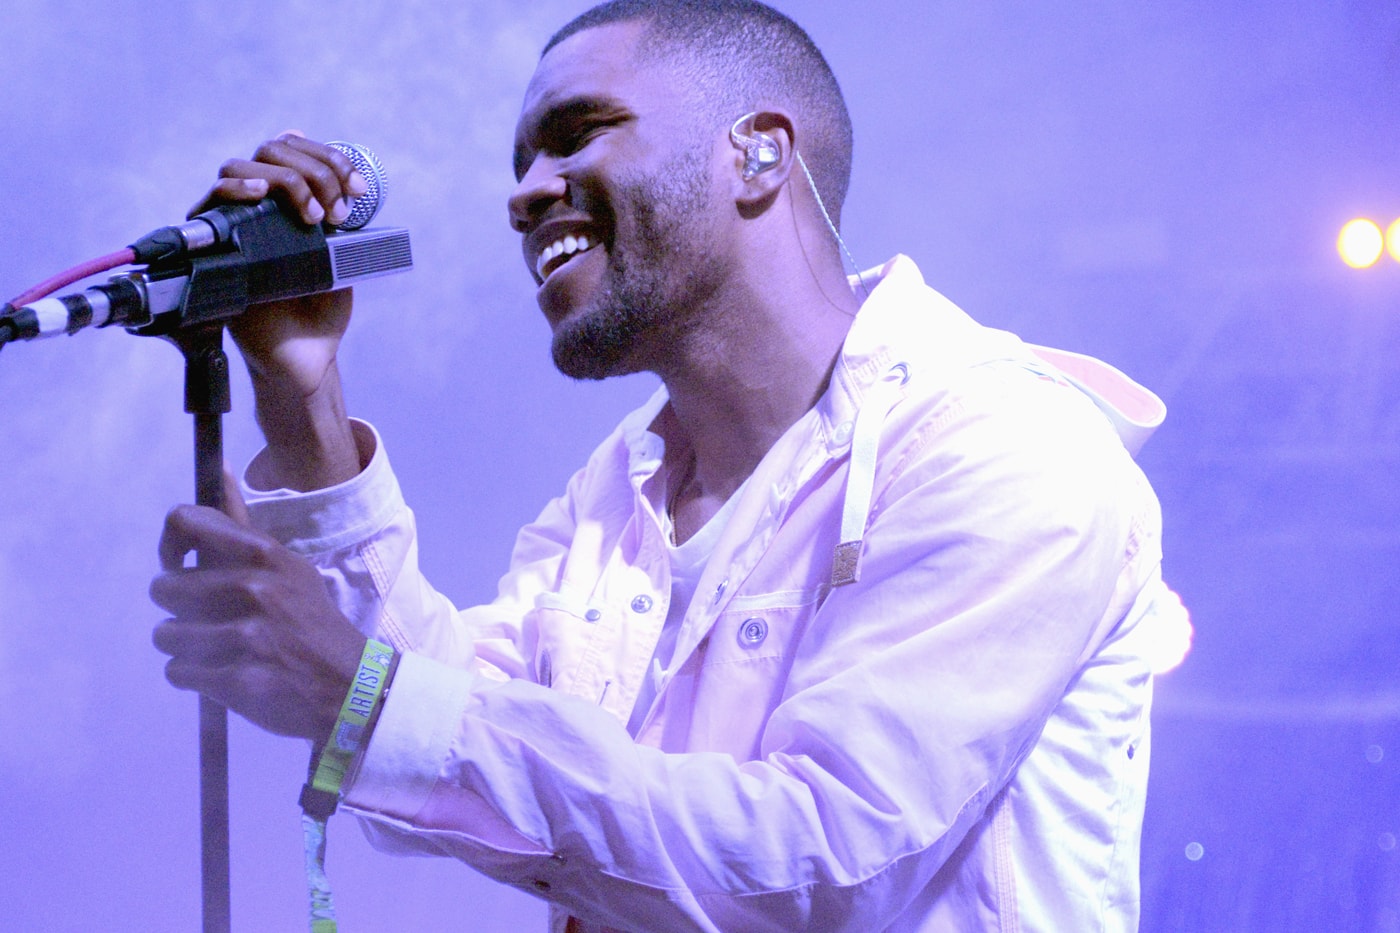 read-a-list-of-frank-oceans-favorite-movies-from-his-boys-dont-cry-zine